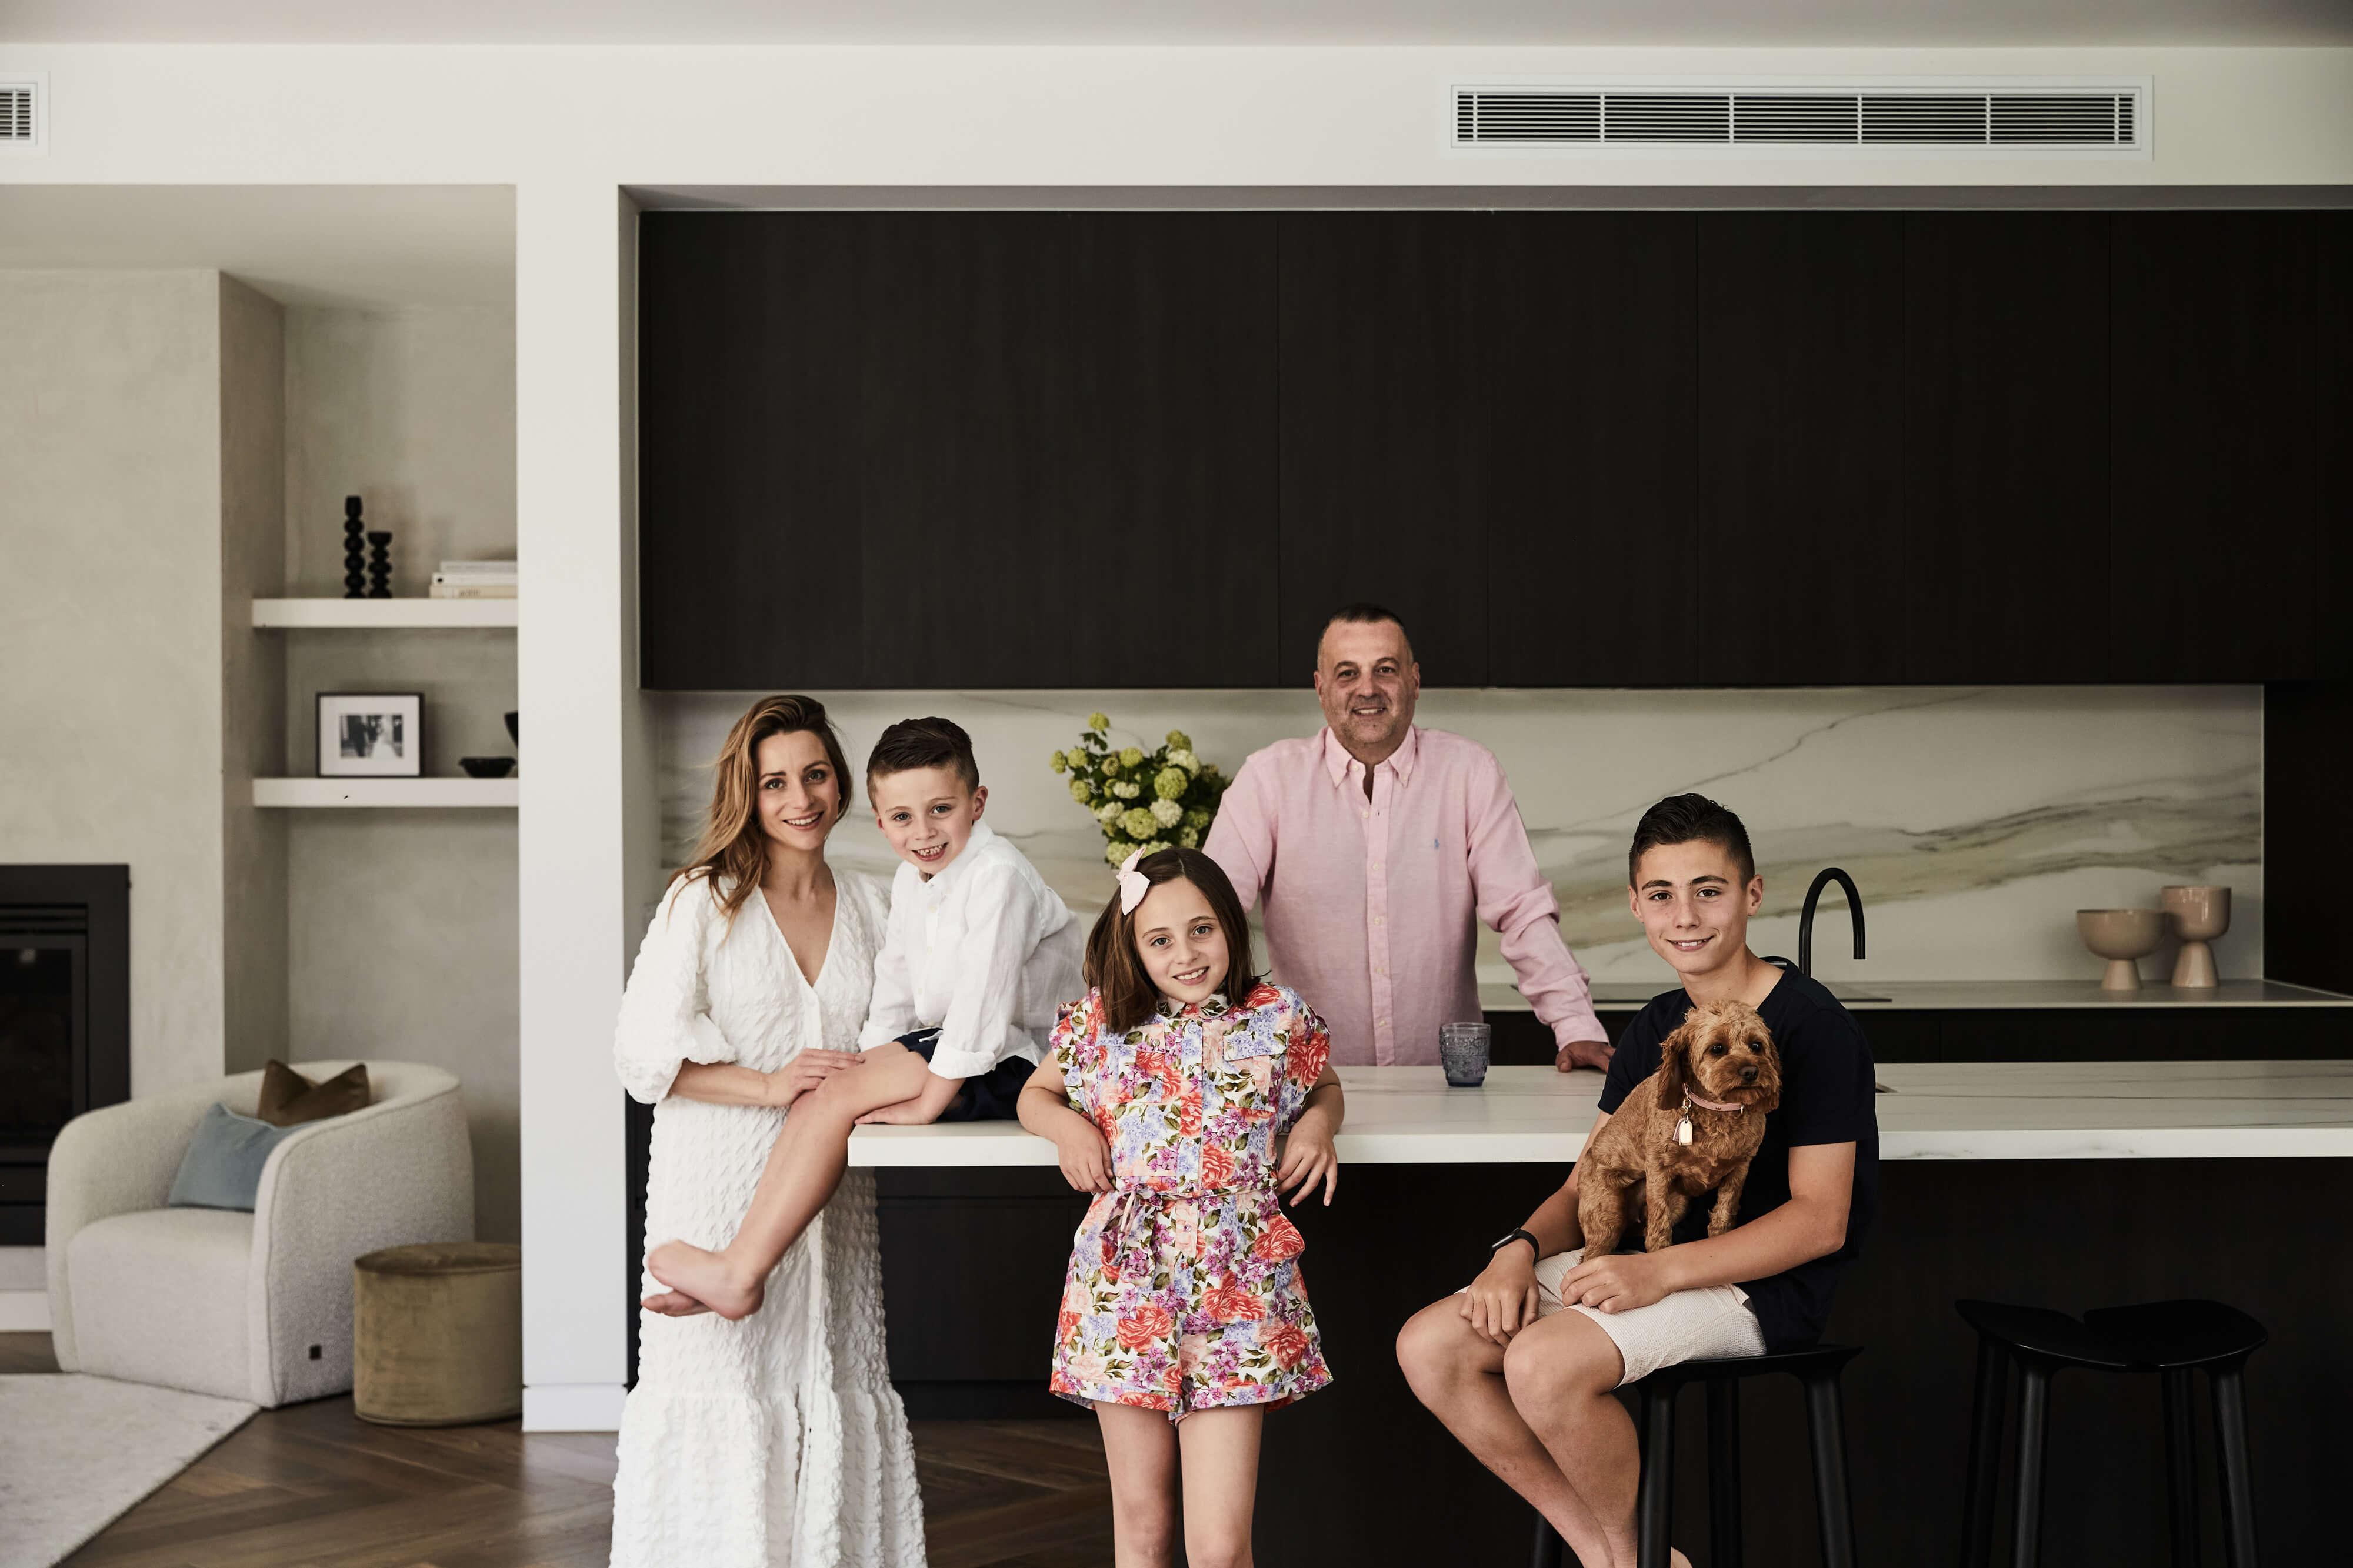 A modern kitchen scene with a happy family posing for a photograph